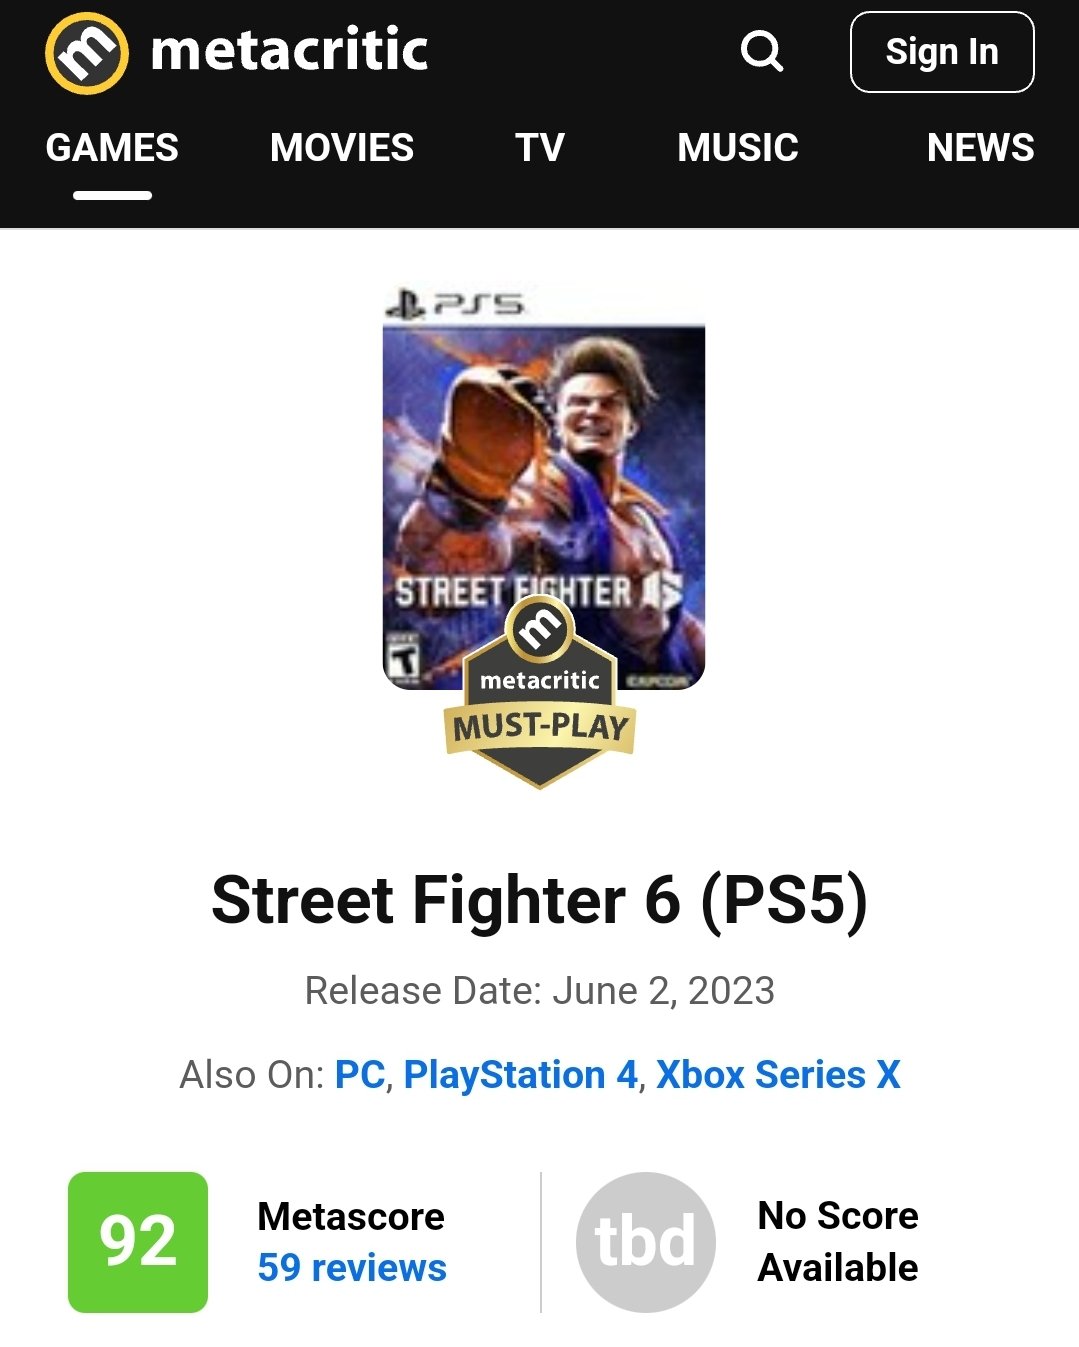 PeterOvo on X: Street Fighter 6: ✓ 92 Metacritic ✓ 92 Opencritic  Abandoning PlayStation exclusivity has helped Street Fighter become a  better game. Capcom don't play dumb games like Square Enix.   /